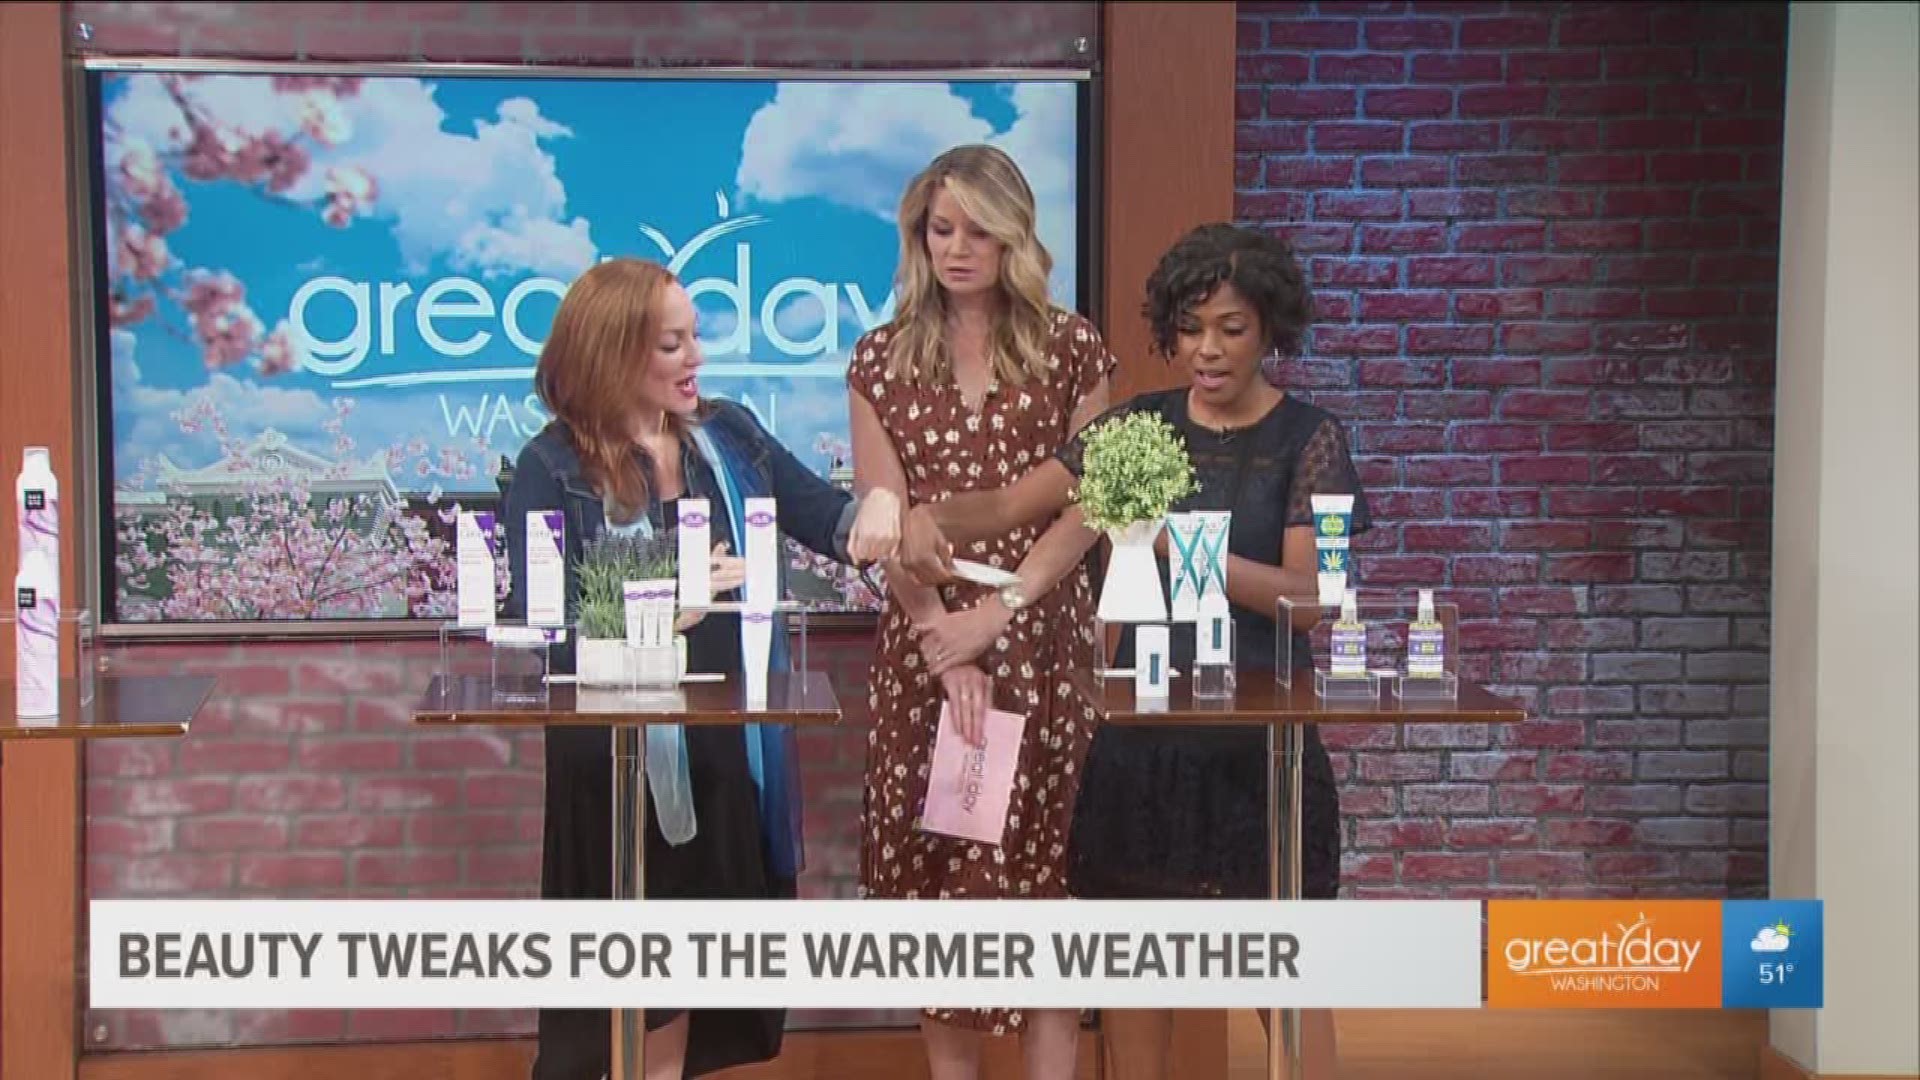 With more humidity in the air and sunnier days, it's time to switch up your beauty routine! Lifestyle expert Cheryl Kramer Kaye shares a few inexpensive products that can keep your hair and skin glowing in the summer months.